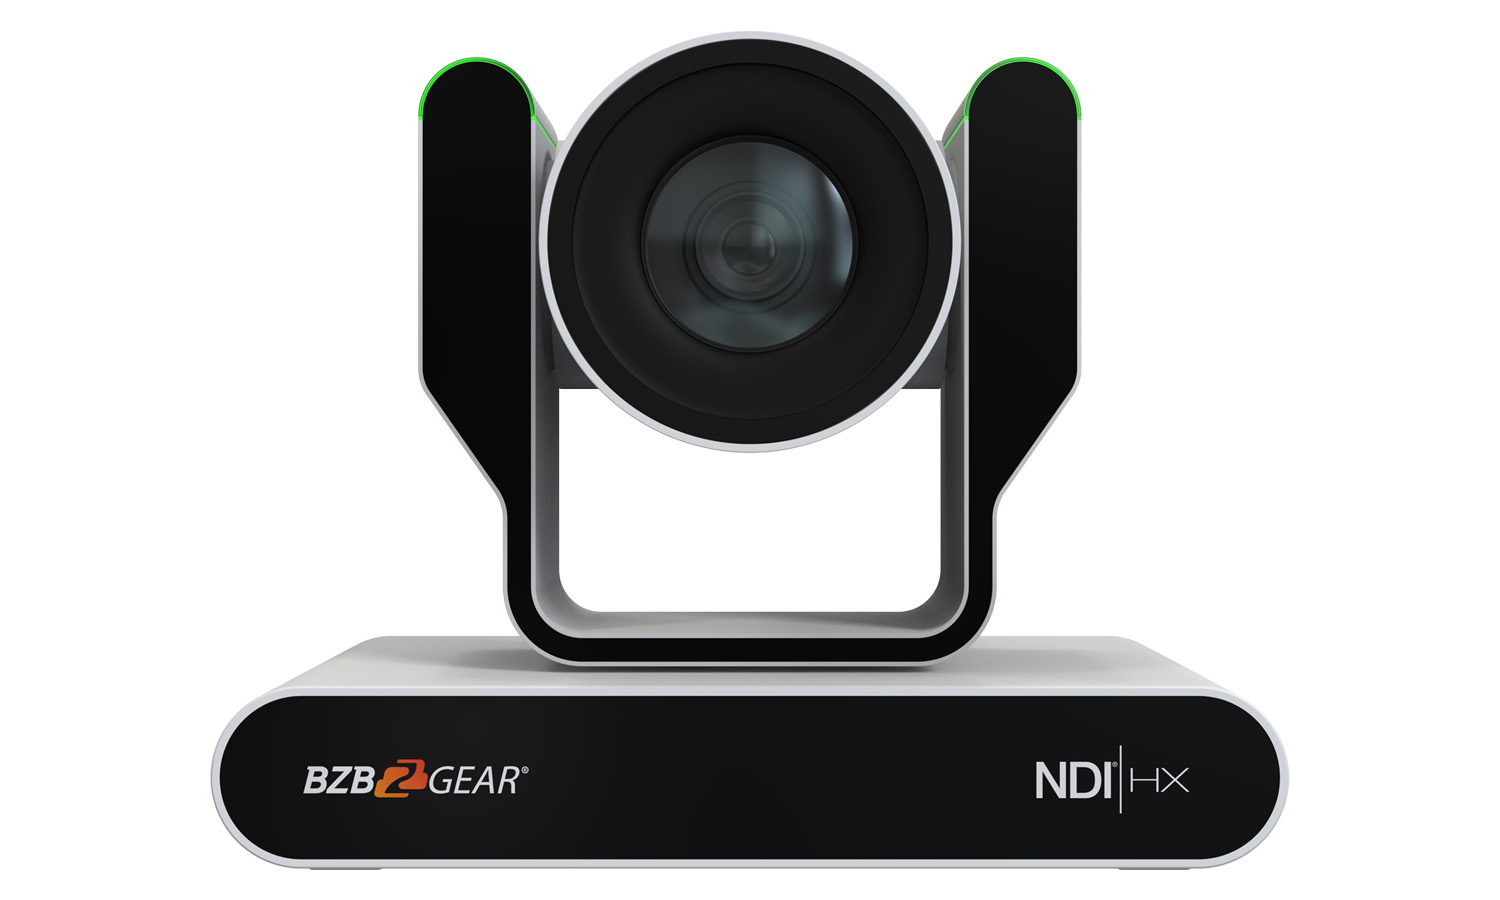 BG-ADAMO-4KND25X-W 25X 4K@60Hz HDMI2.0/12G-SDI/USB 2.0/USB 3.0/NDI|HX Live Streaming PTZ Camera with Tally Lights (White) by BZBGEAR